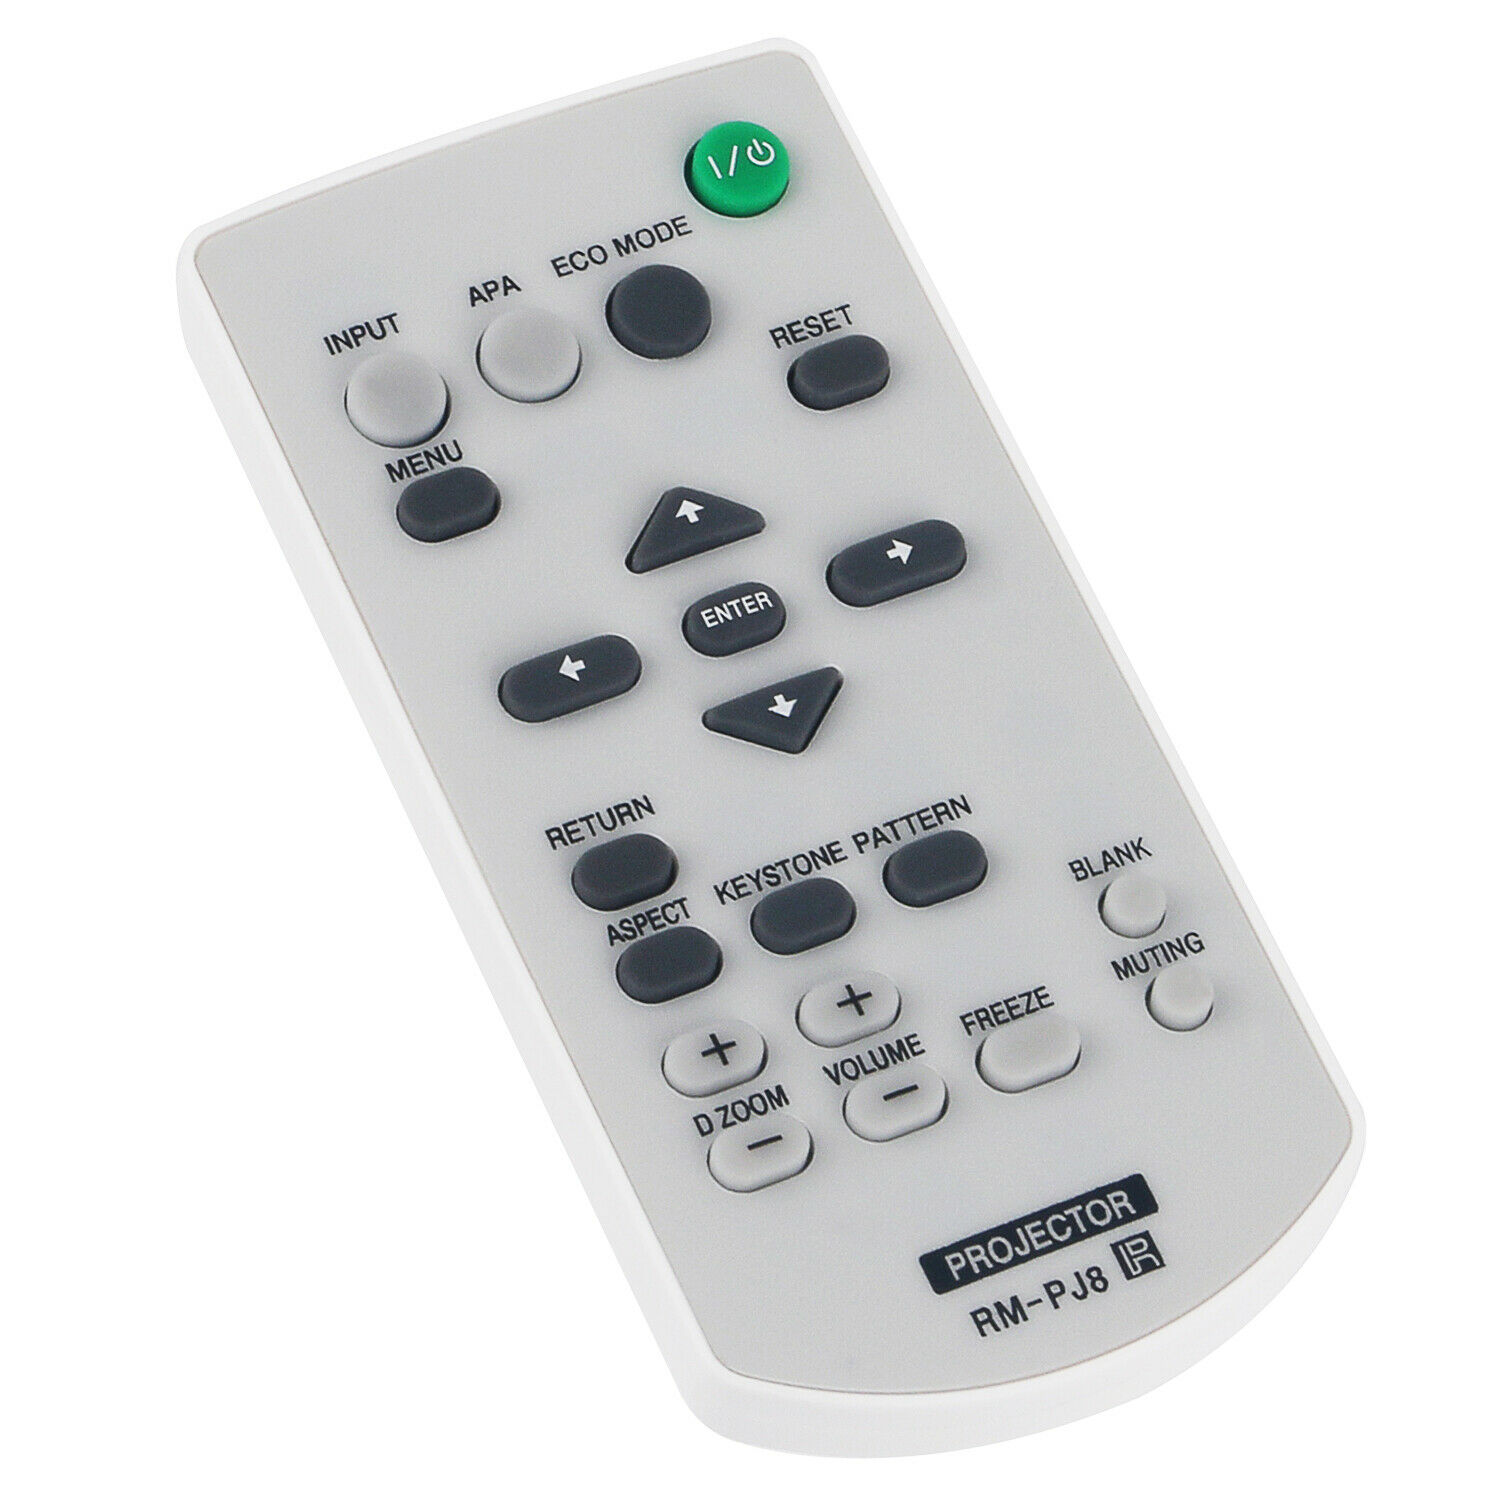 New Remote Control RM-PJ8 for Sony Projector VPL-EW225 VPL-EW275 VPL-EW245  VPL-EX275 VPL-EX271